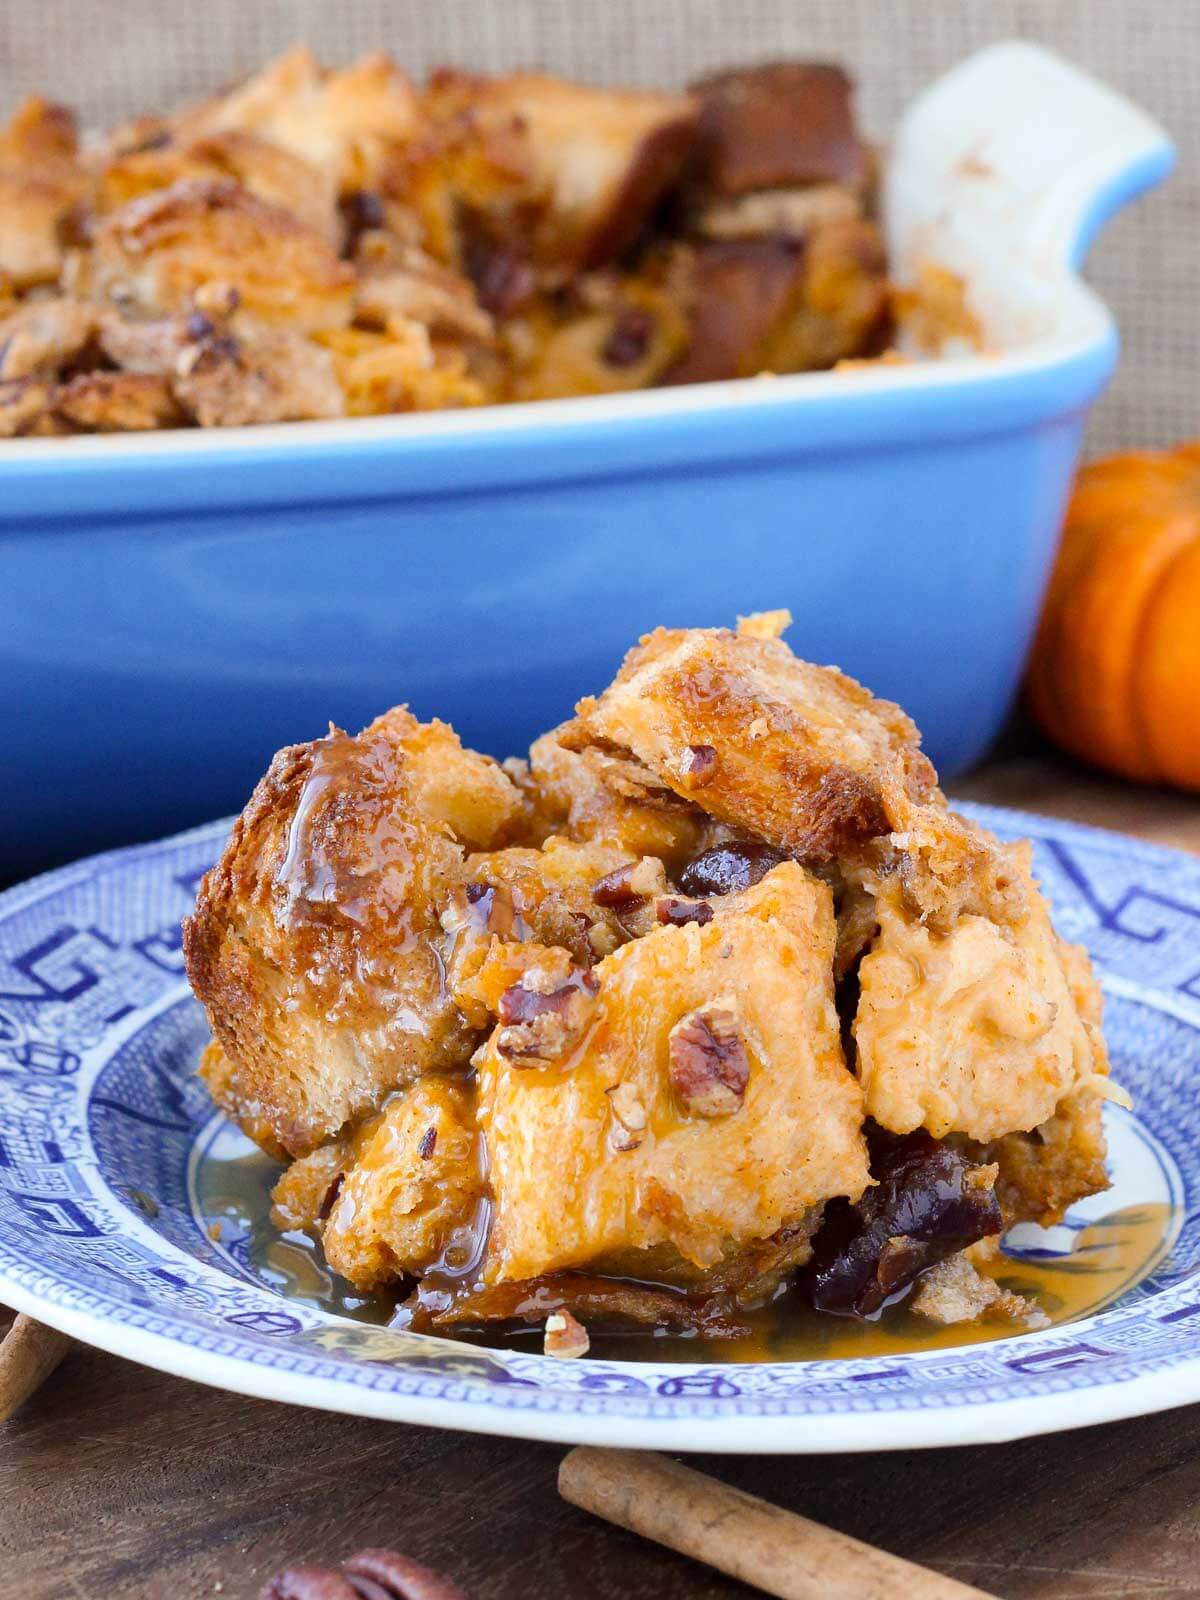 pumpkin bread pudding blue plate with sauce wood background.